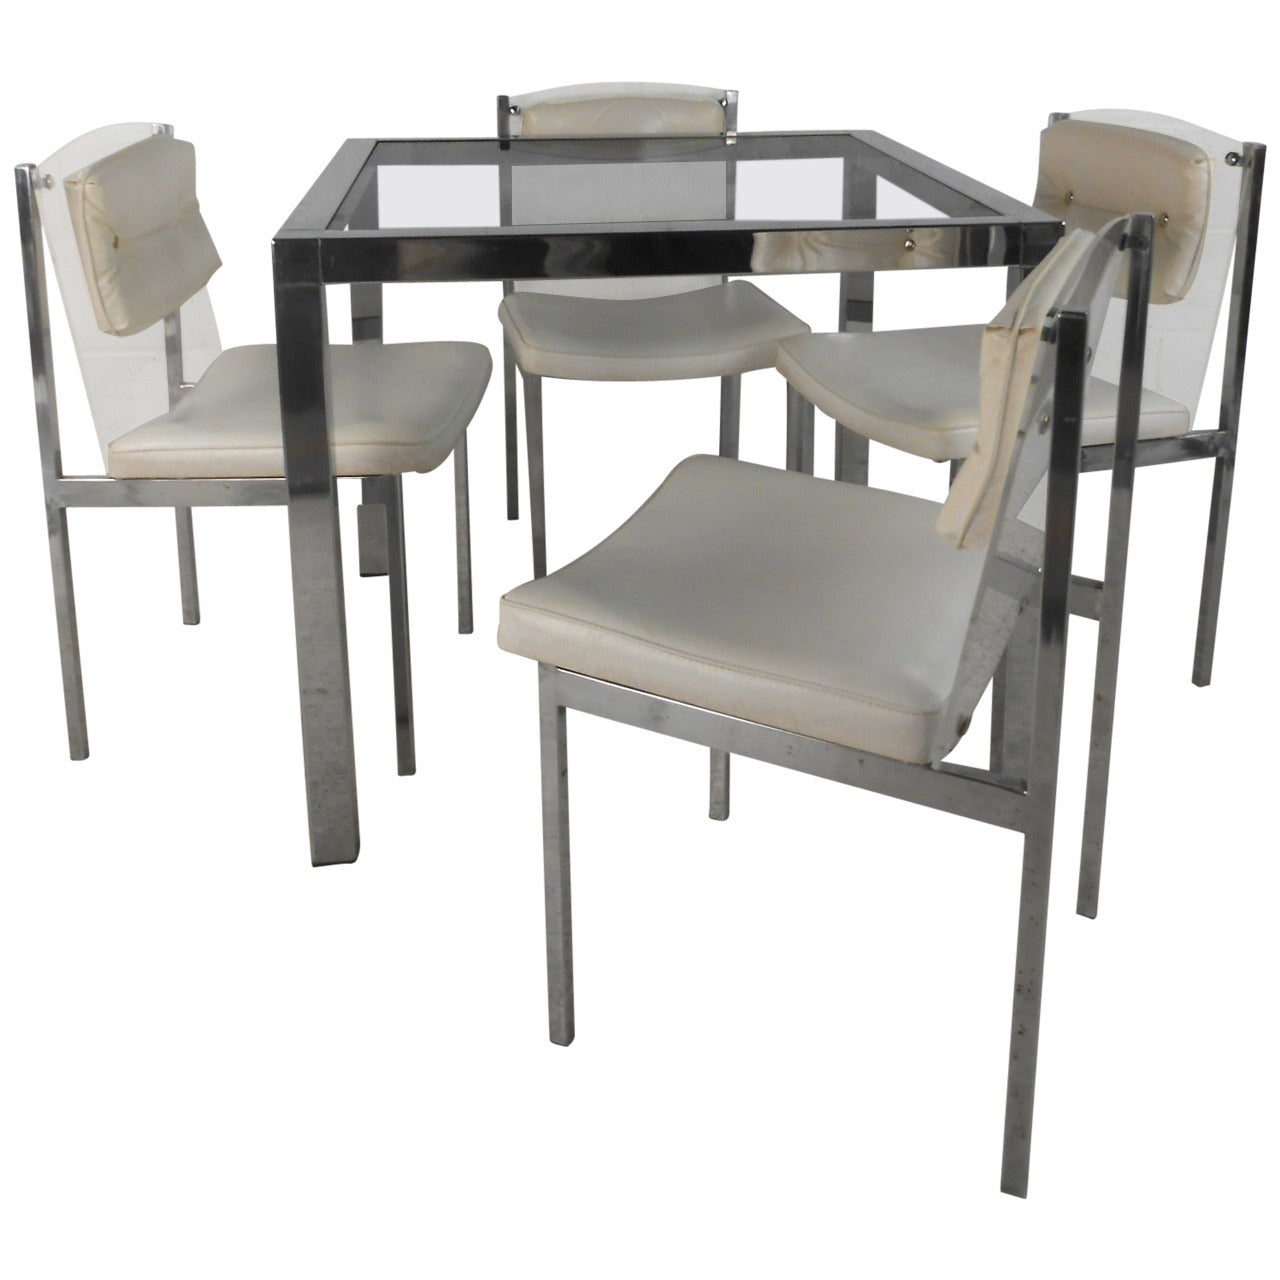 Mid-Century Modern Chrome, Glass, and Lucite Dining Set Table with Chairs